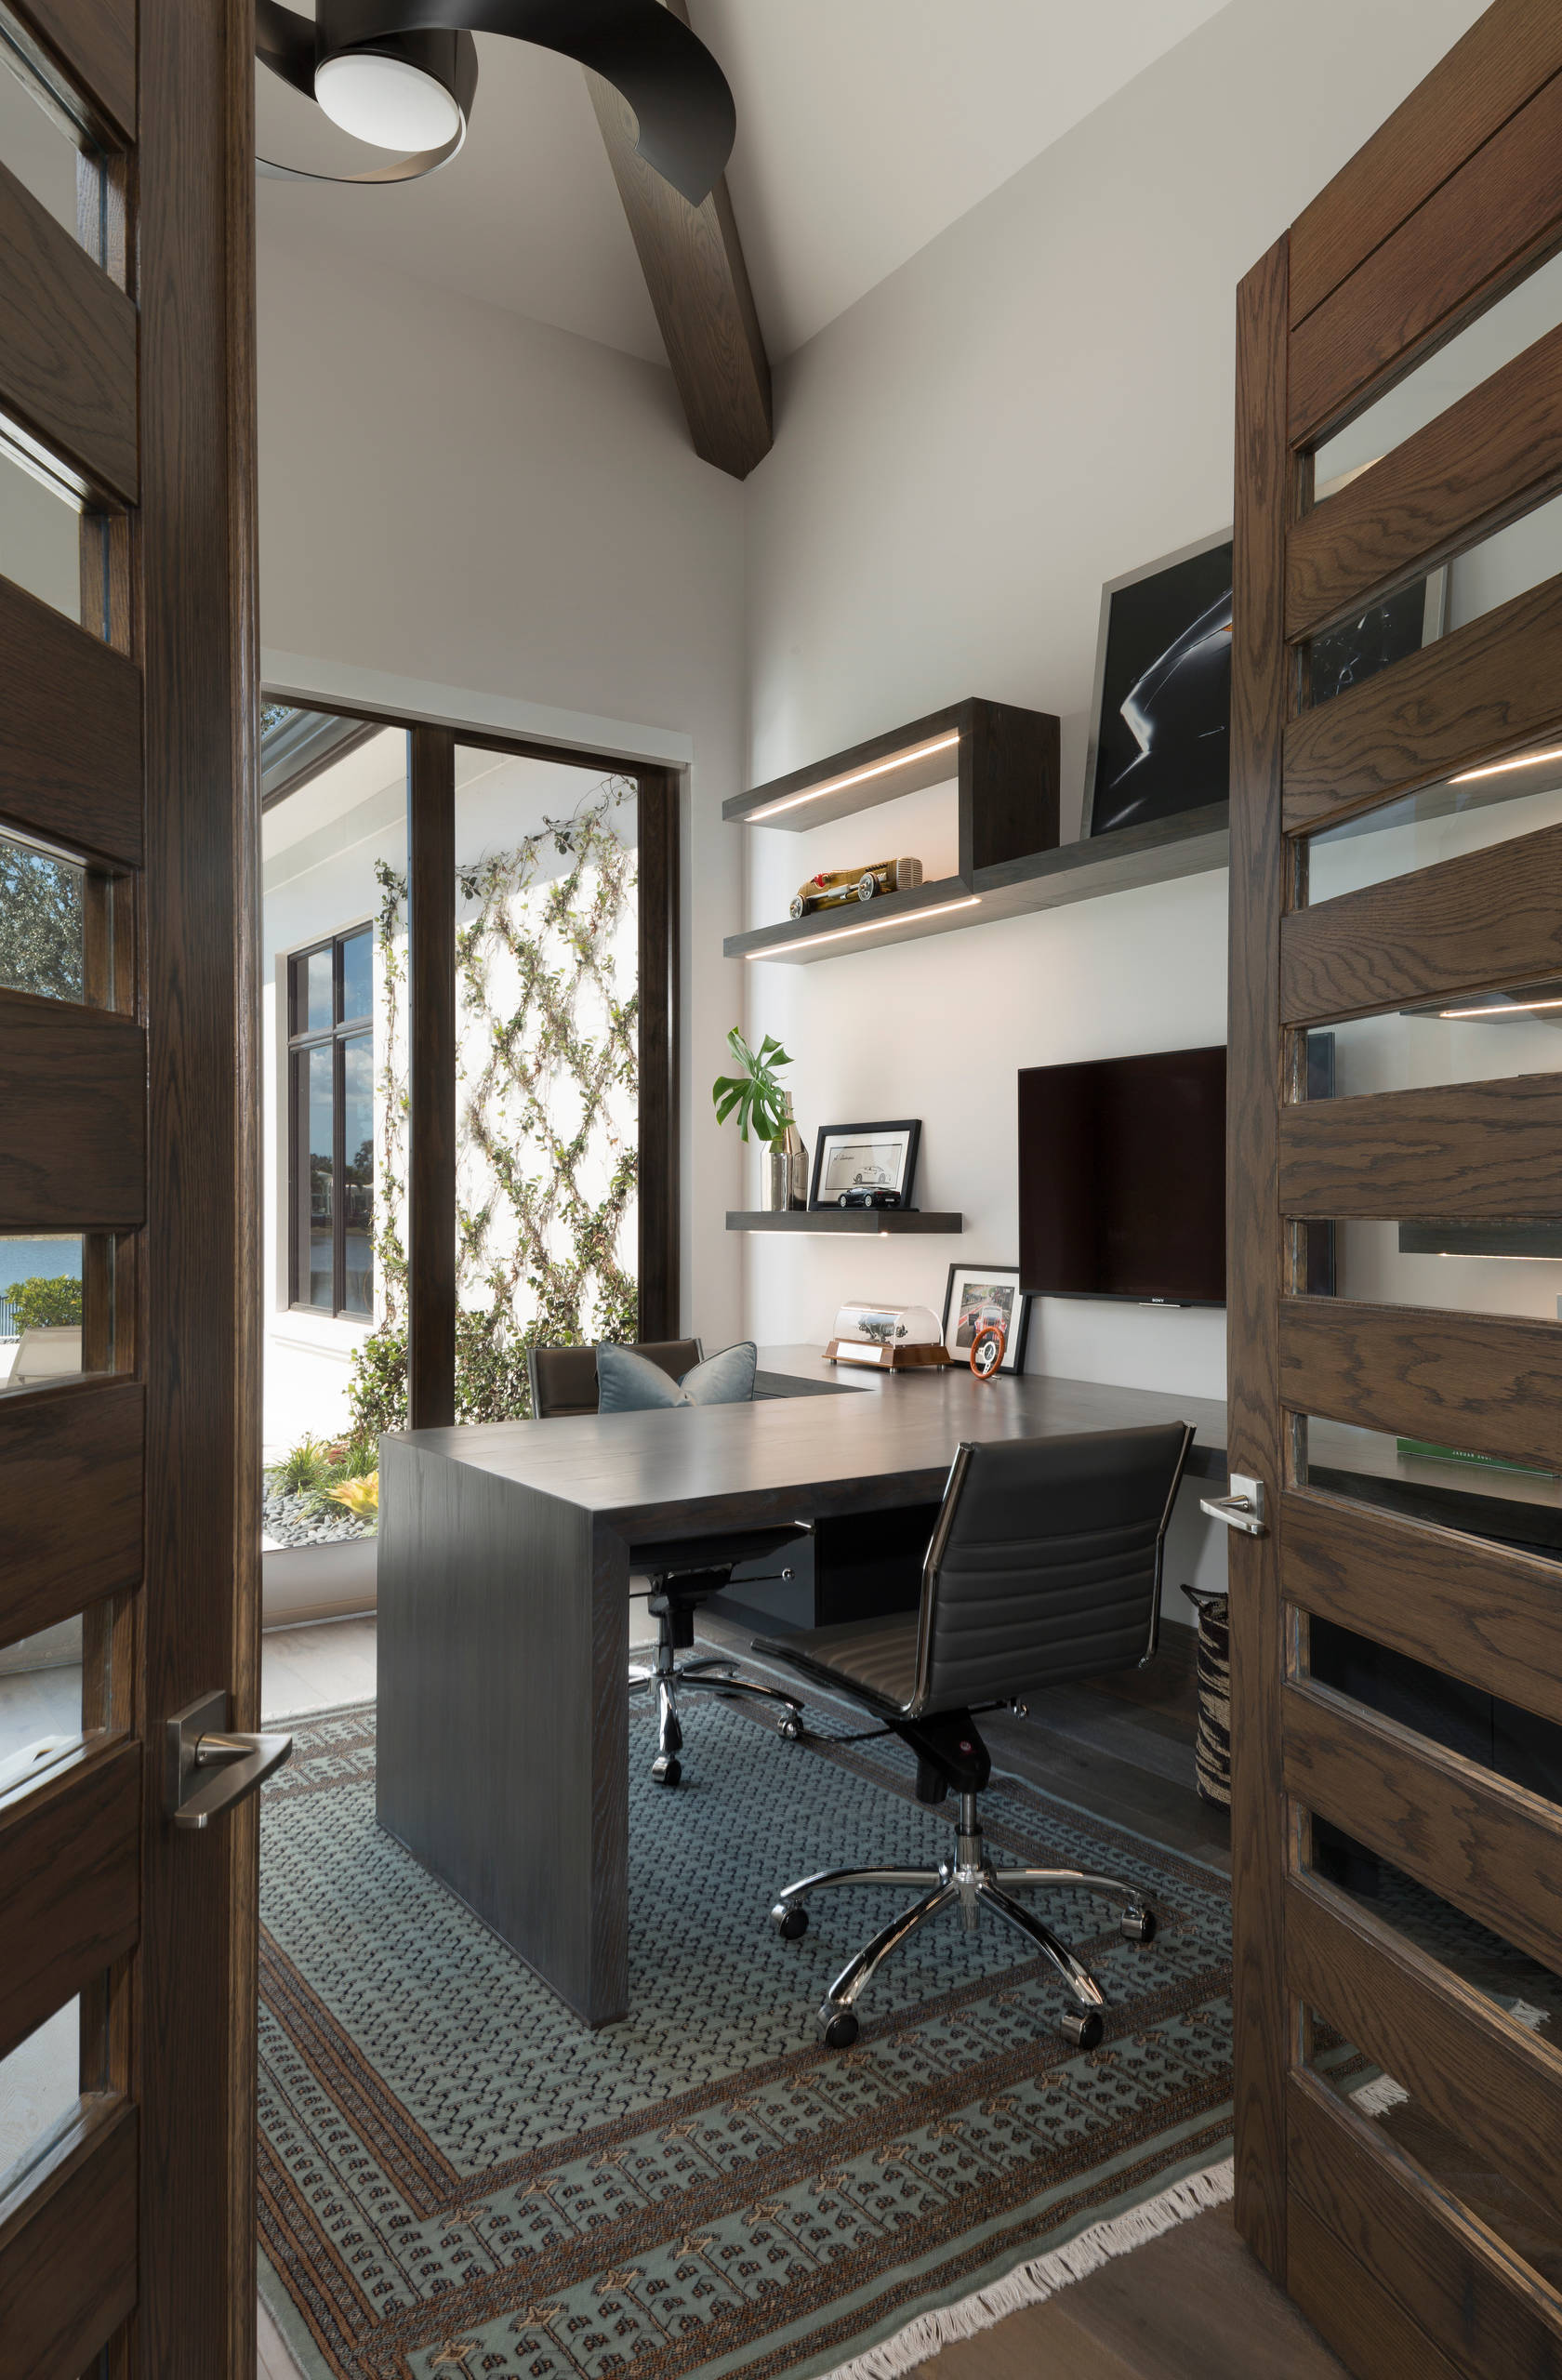 Small Home Offices: Designing A Productive Nook In Limited Space